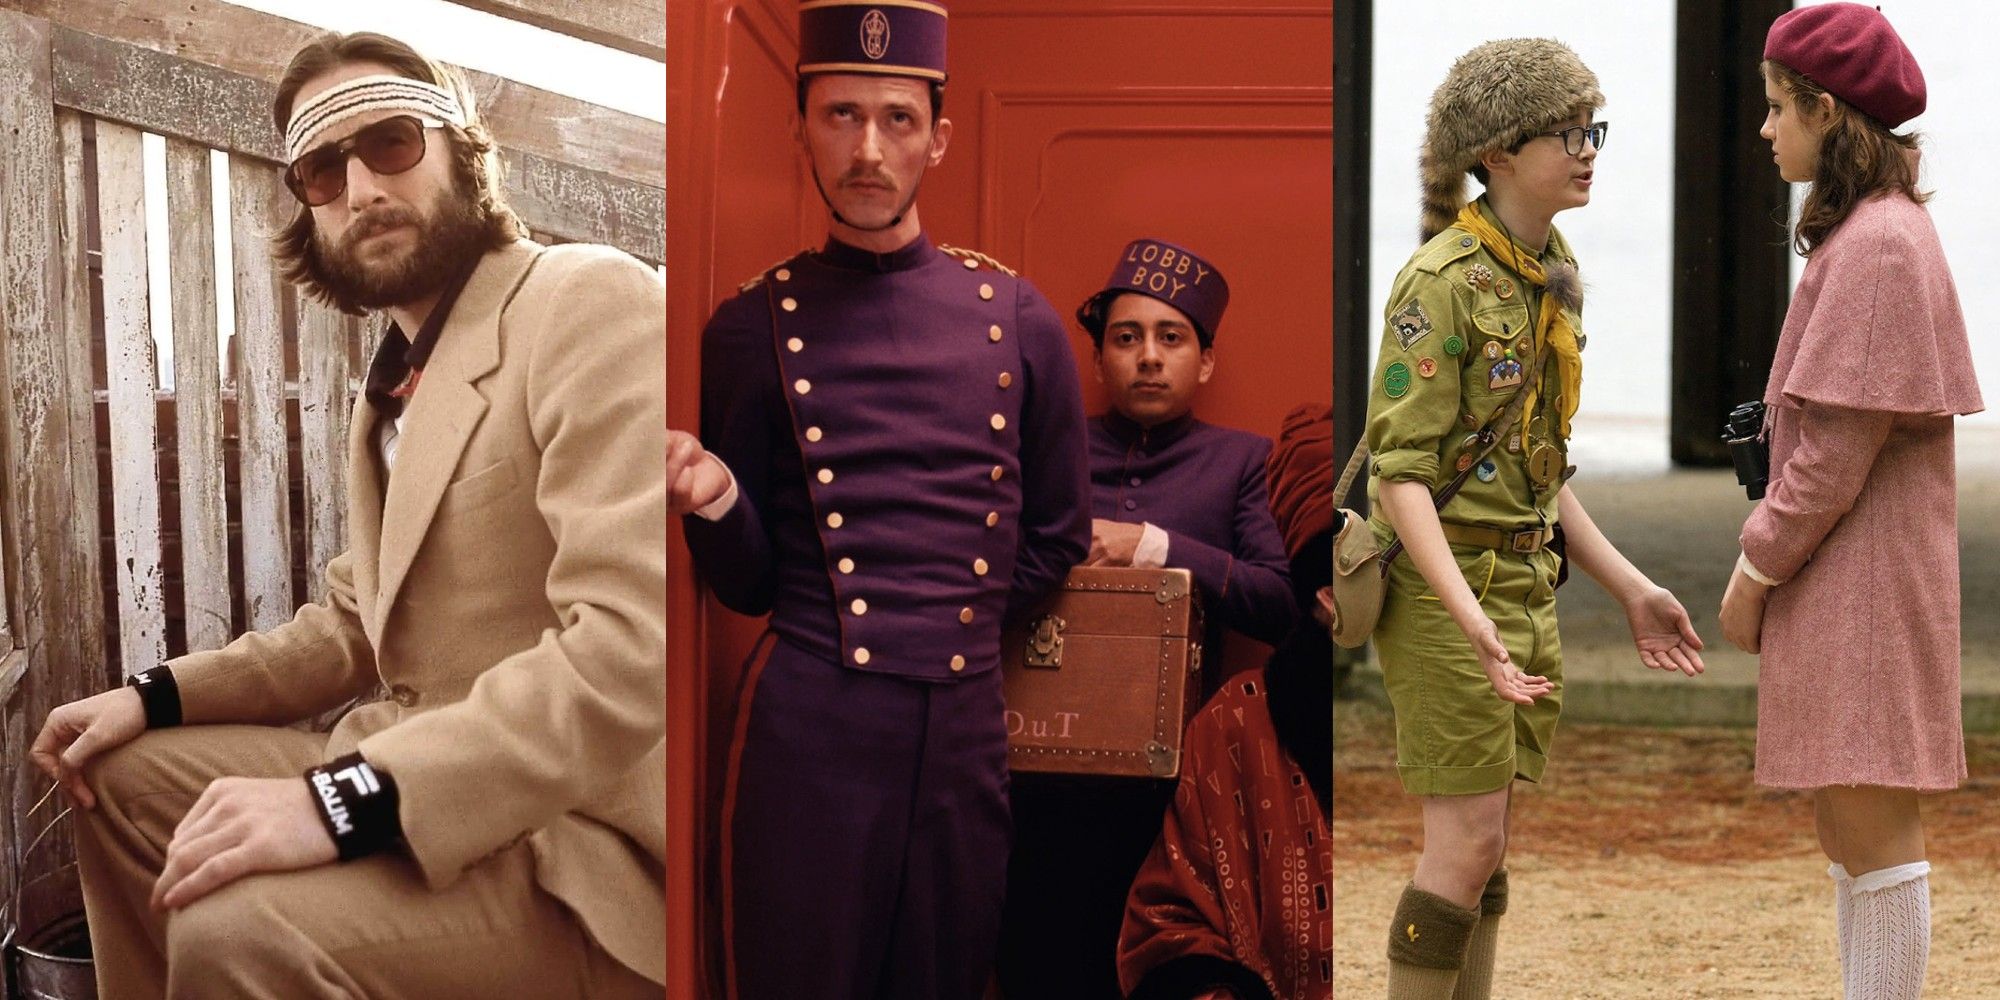 Wes-Anderson-Costume-Design-1